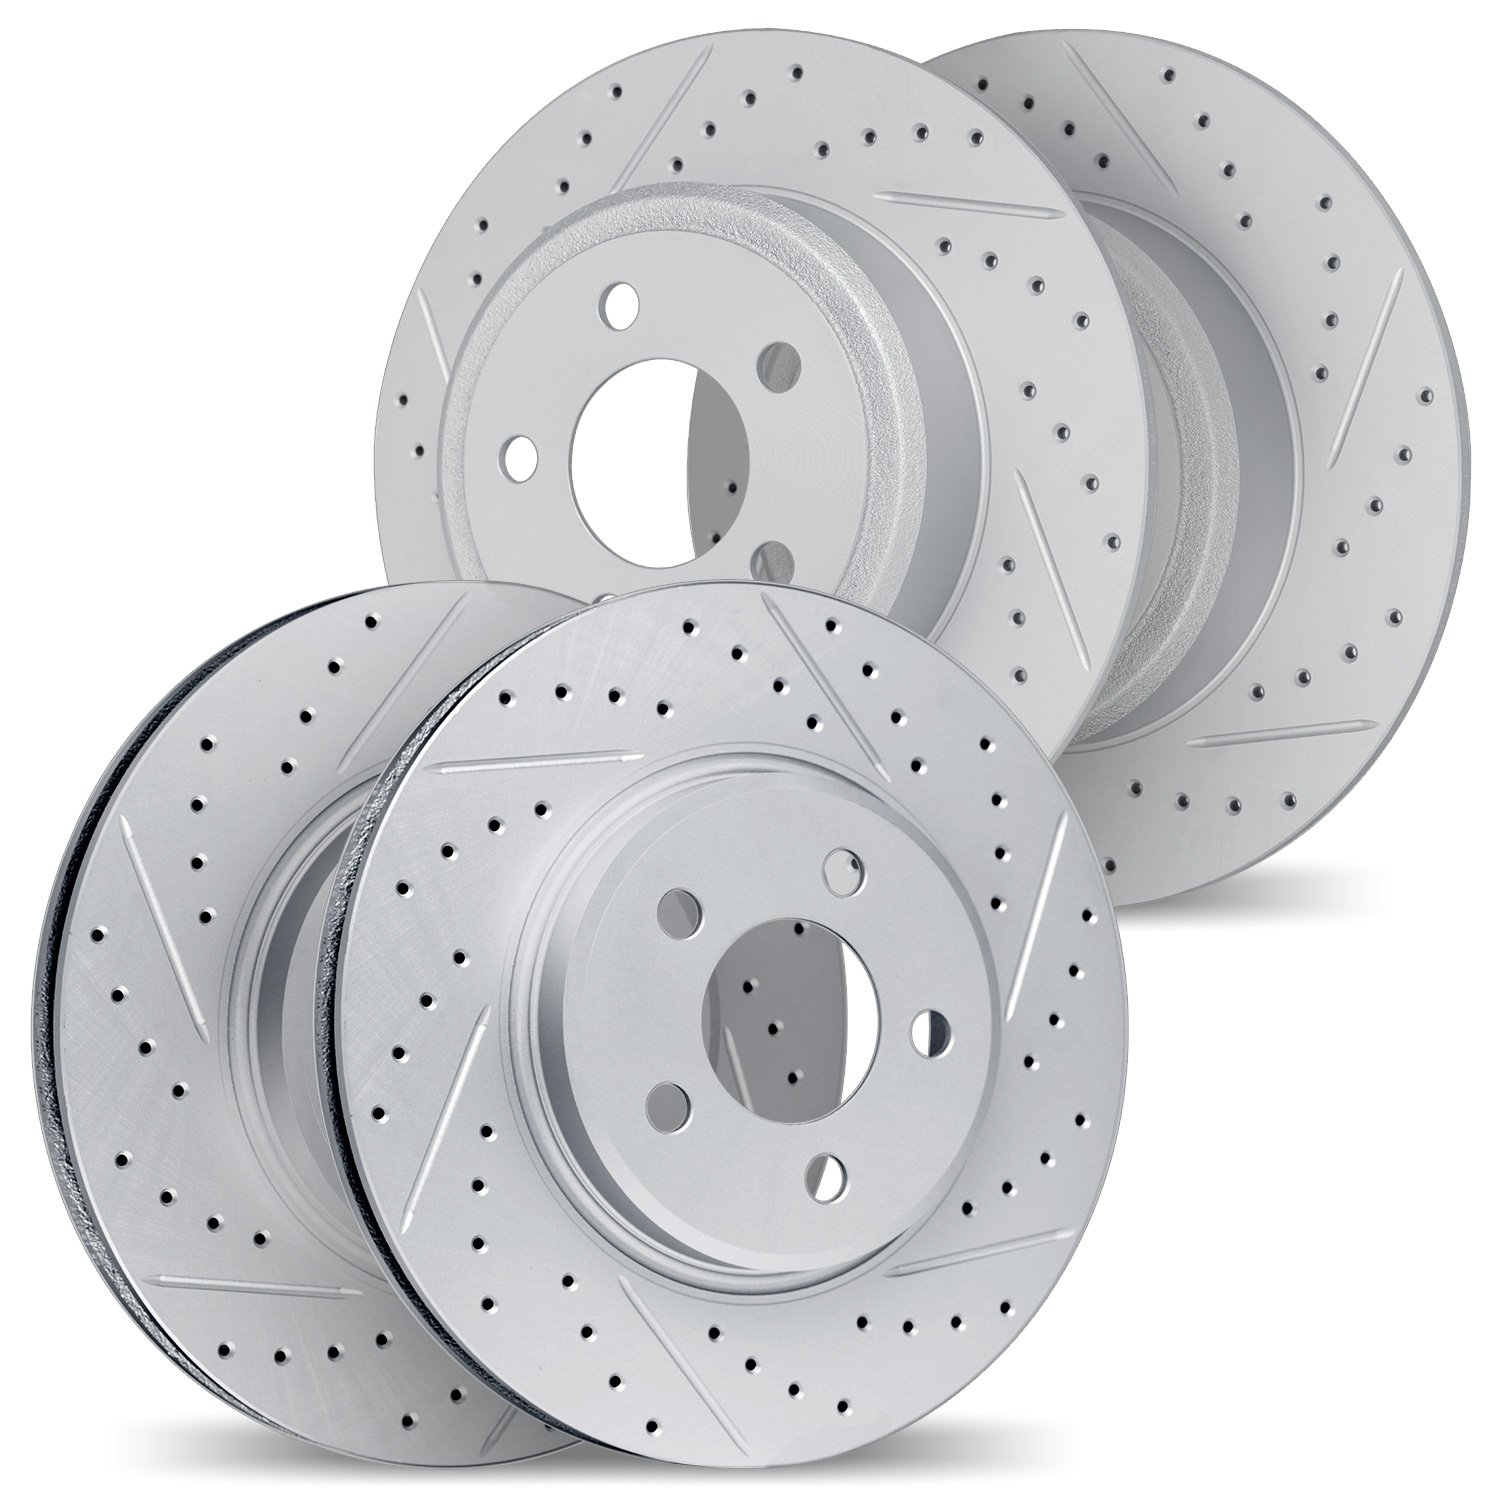 2004-80014 Geoperformance Drilled/Slotted Brake Rotors, 2006-2015 Ford/Lincoln/Mercury/Mazda, Position: Front and Rear